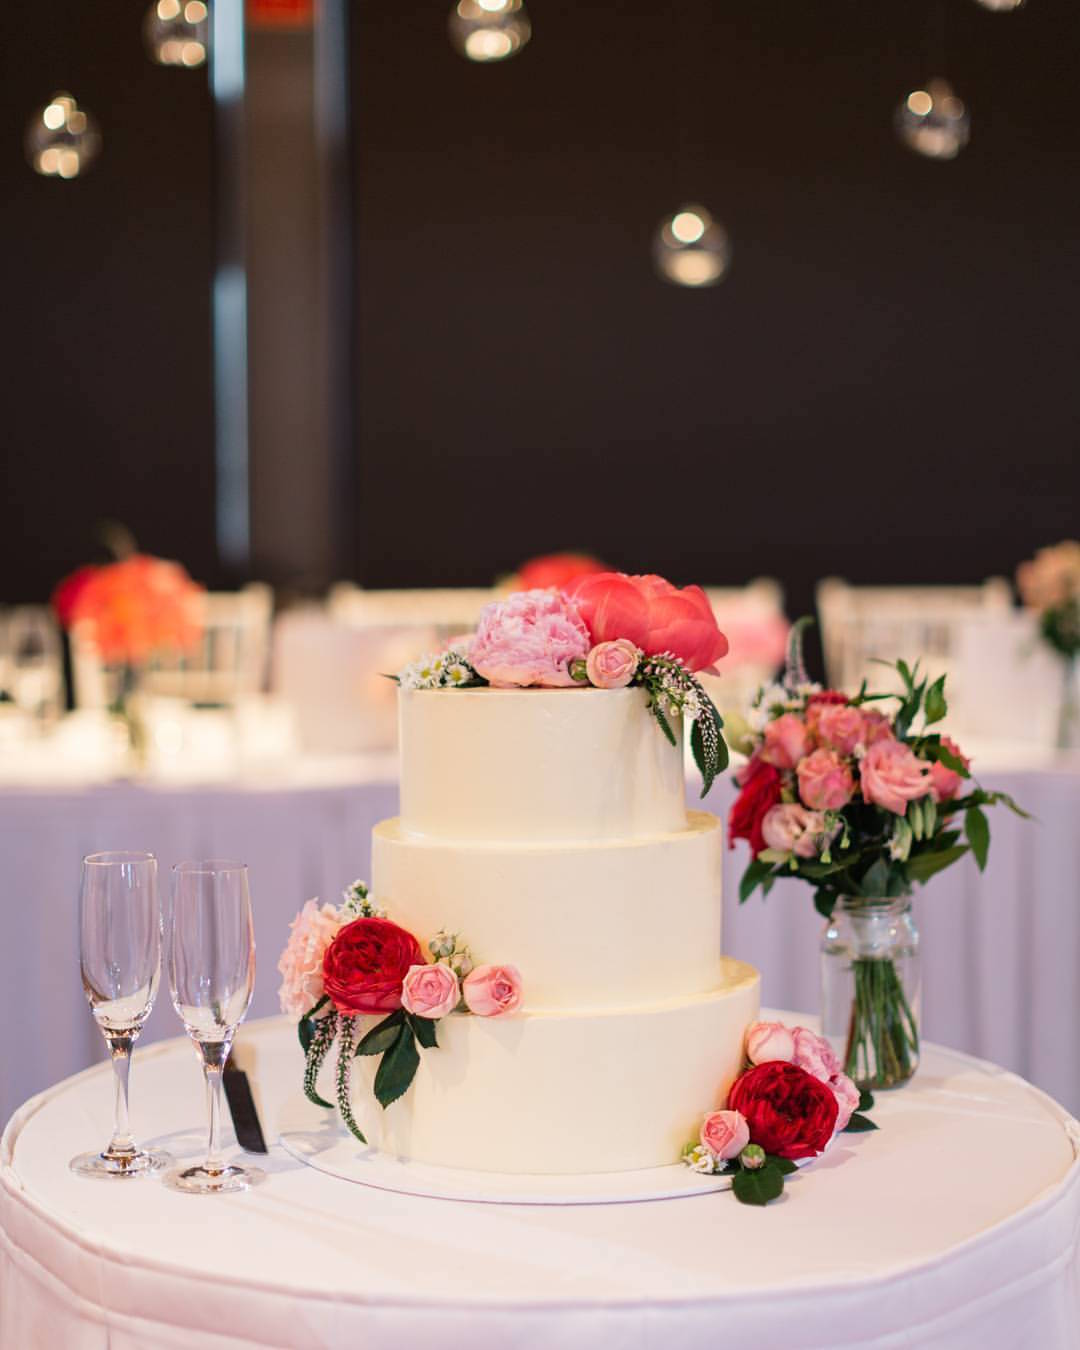 Floral Wedding Cake in Adelaide by Brown Sugared Love.